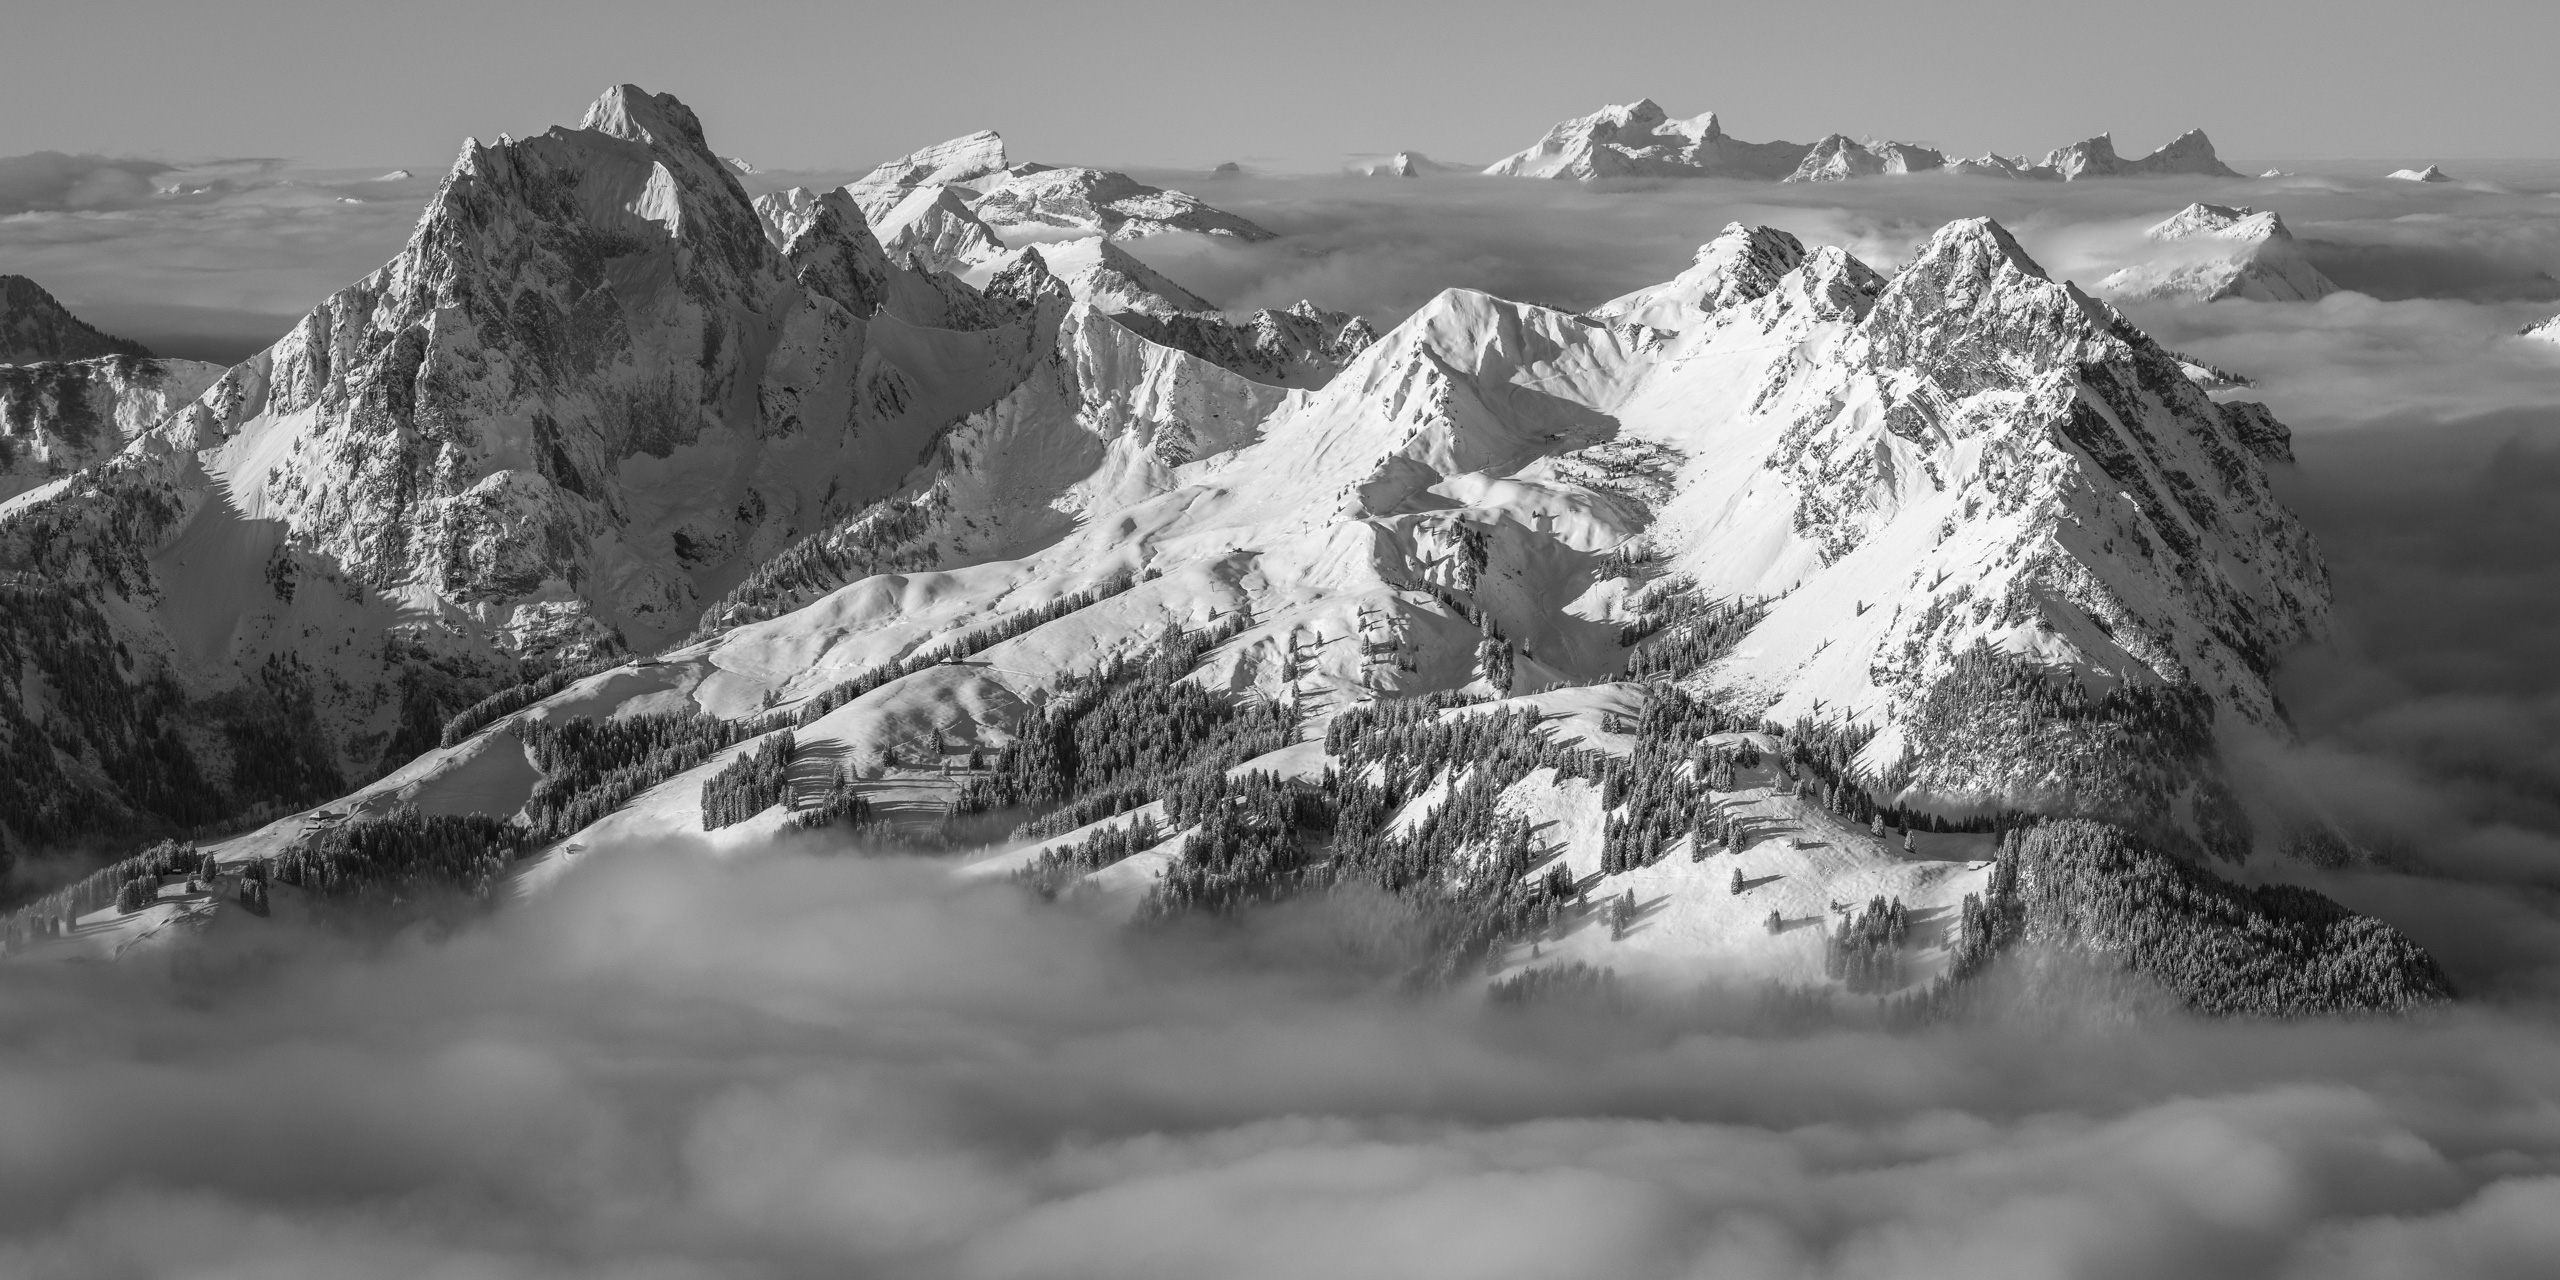 Photo of the Videmanette in Gstaad - View of the Videmanette, the Rubli and the Gummfluh summits - Beautiful mountains Gstaad